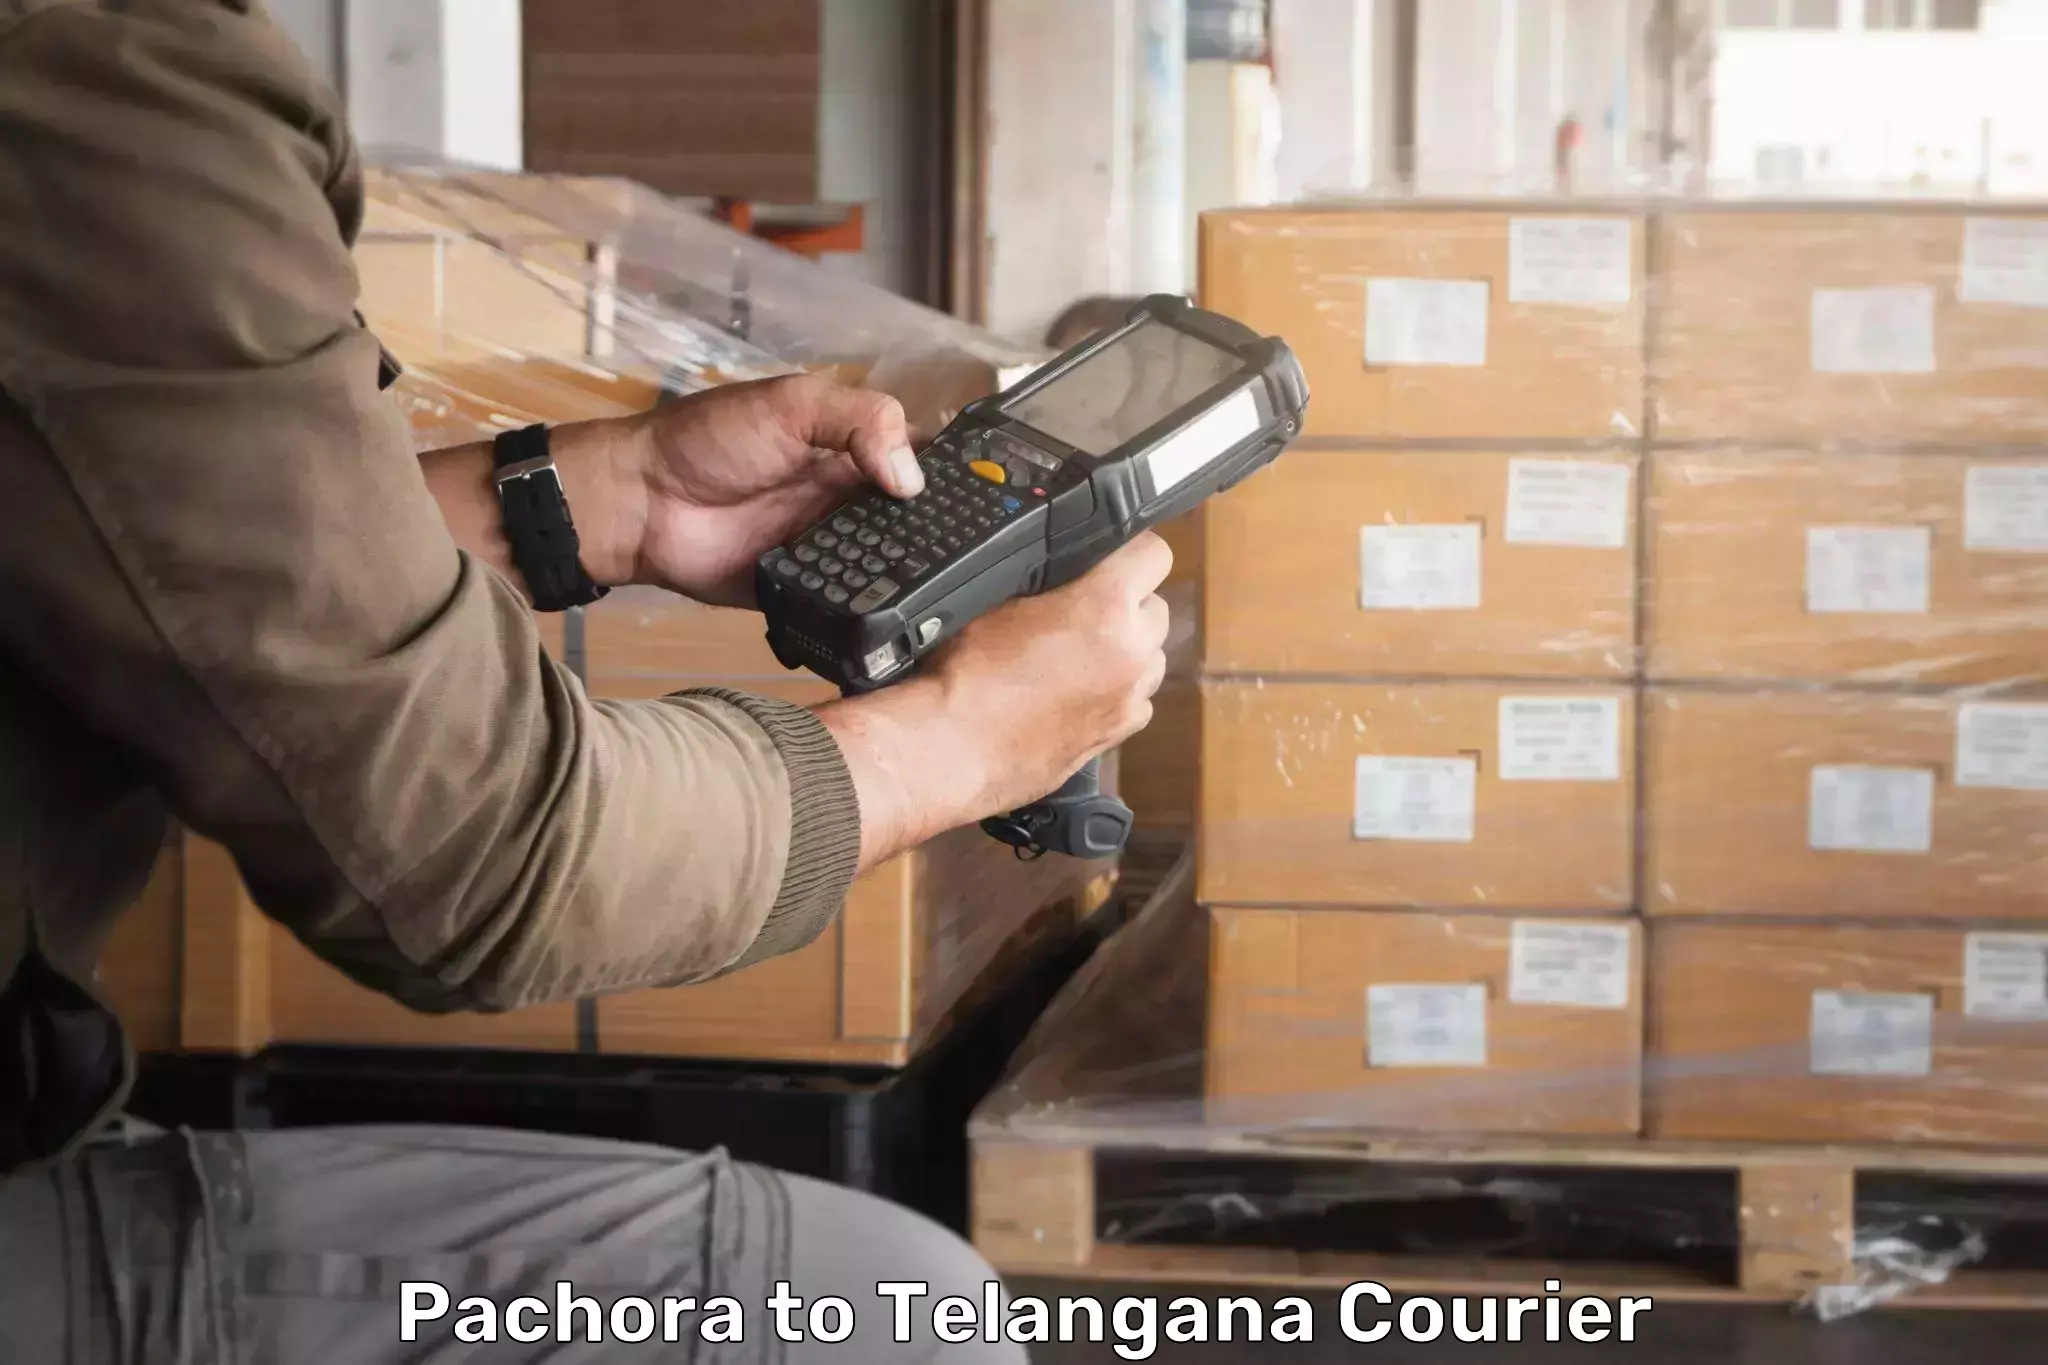 Courier insurance in Pachora to Manneguda